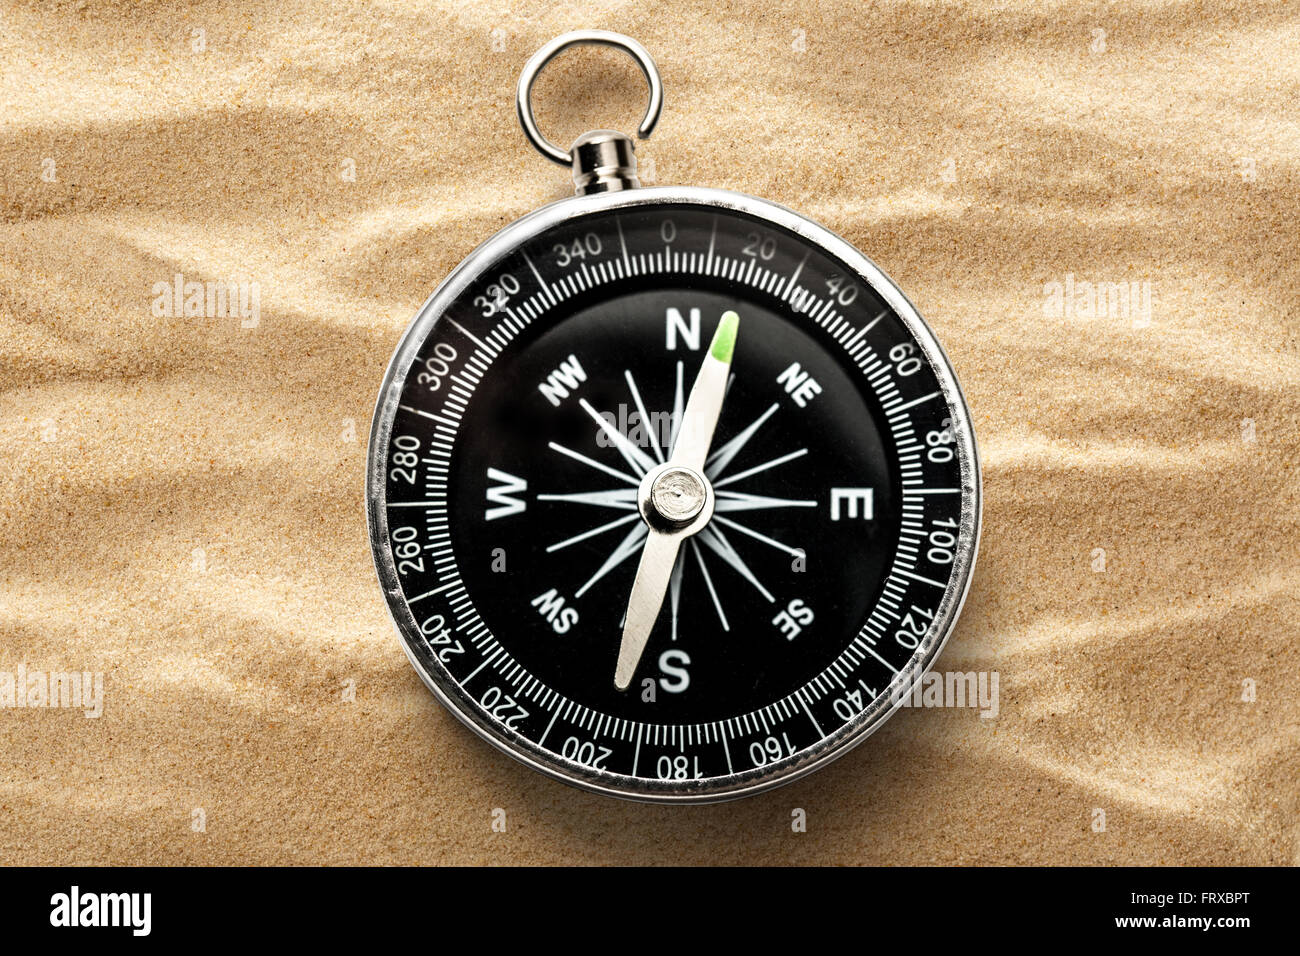 Black compass on the sand background closeup Stock Photo